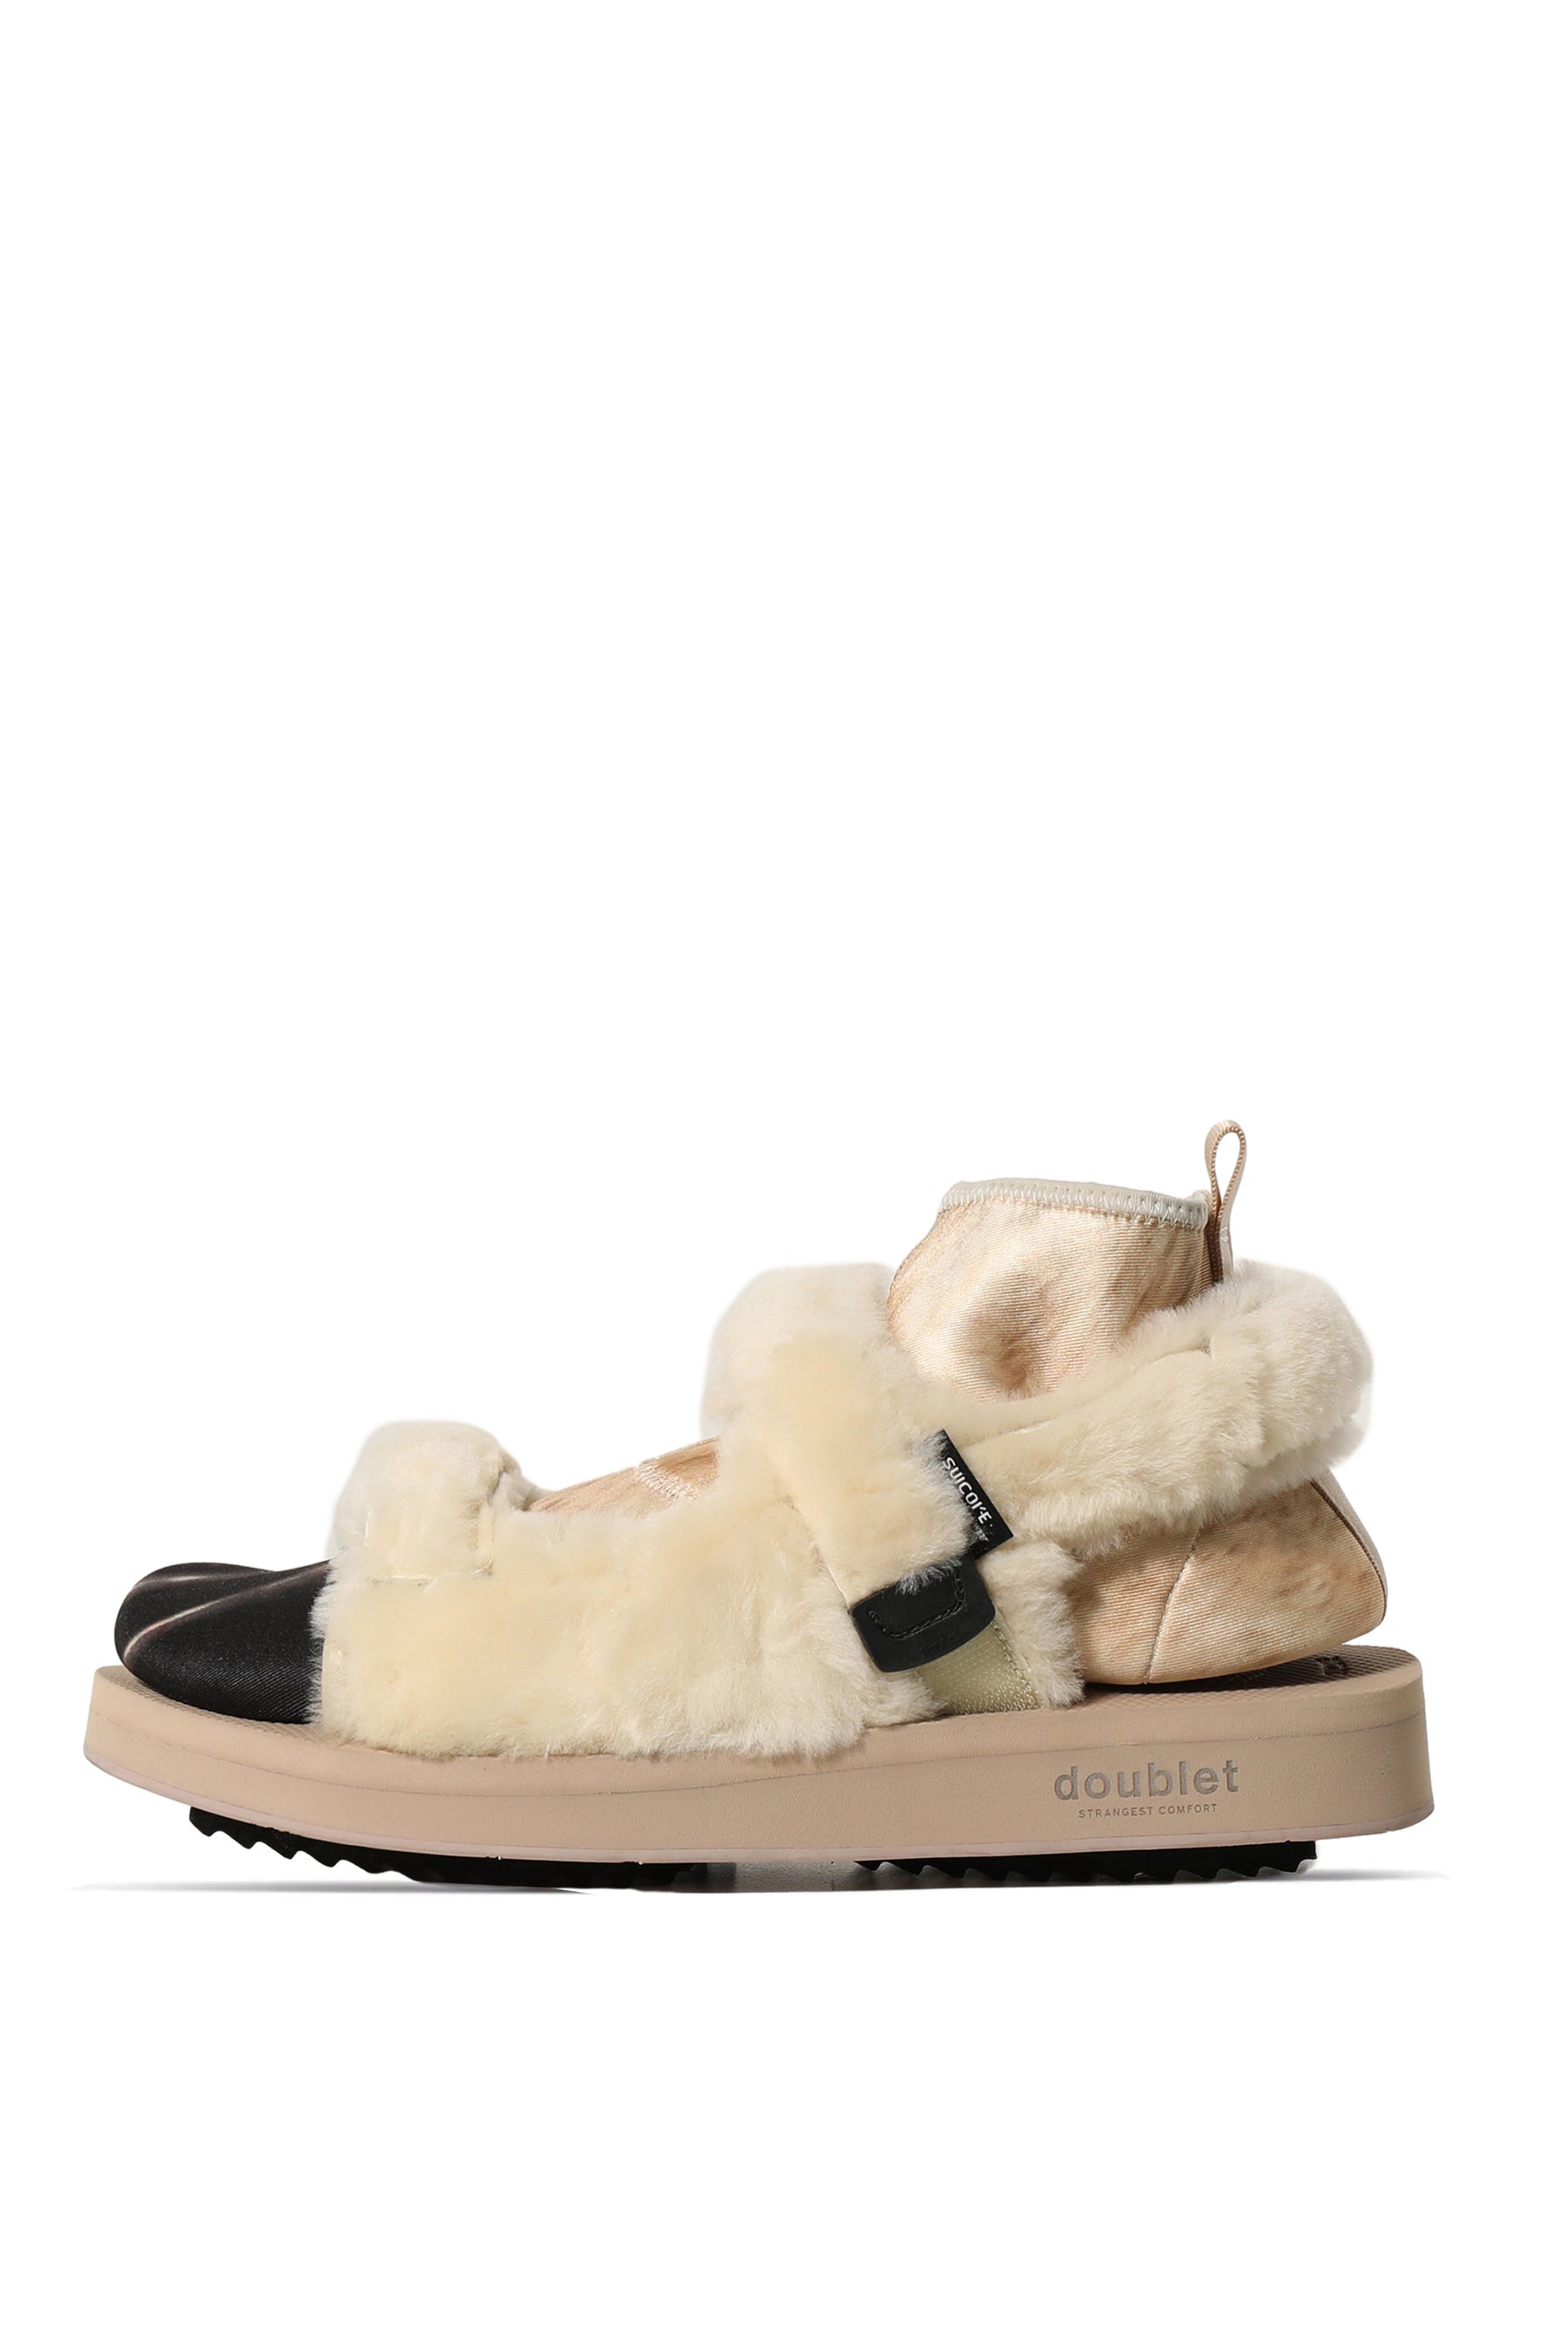 ANIMAL FOOT LAYERED SANDALS / IVORY